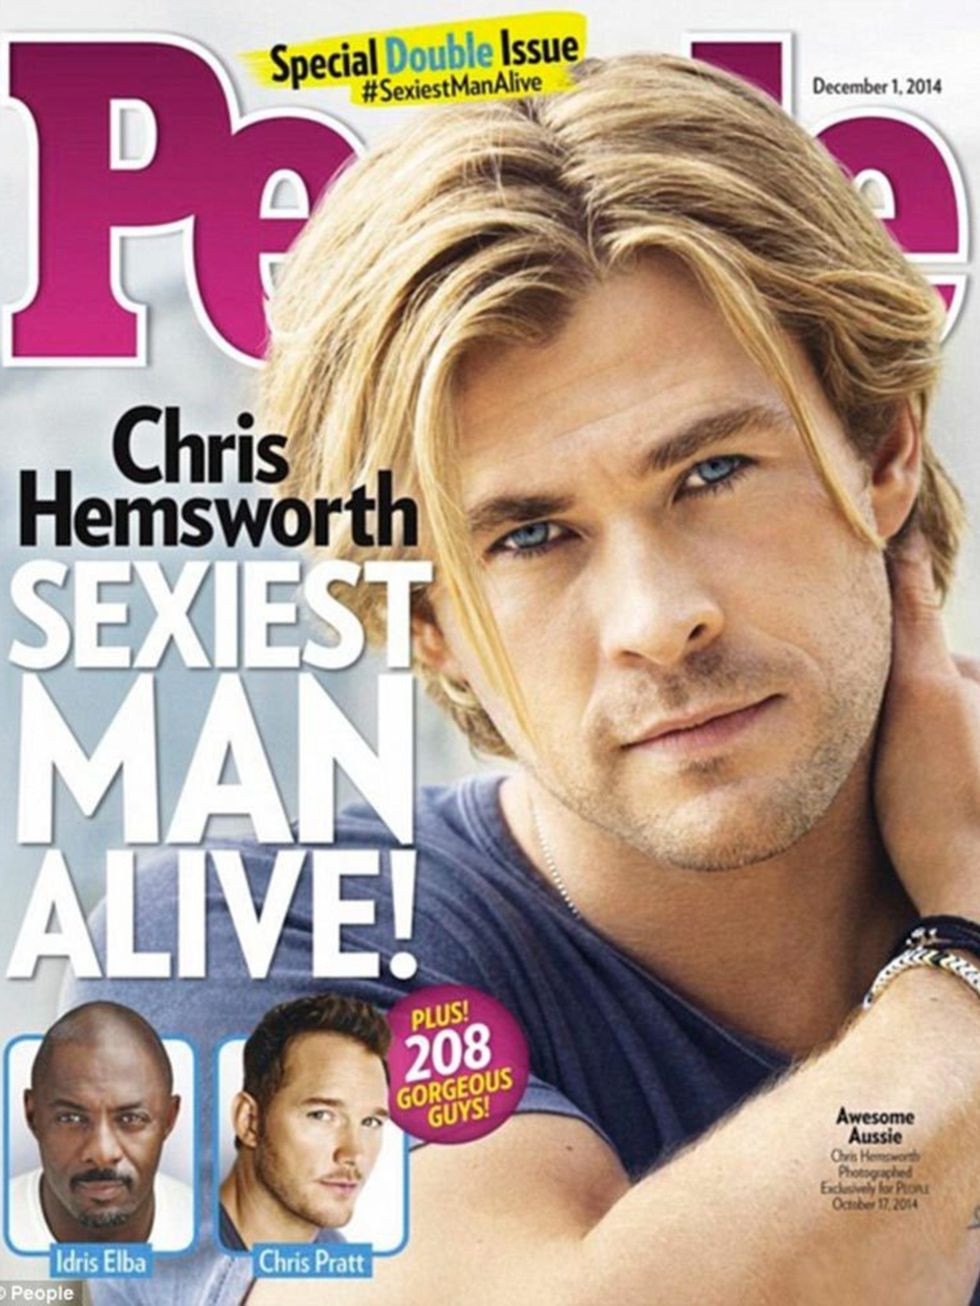 <p>Chris Hemsworth is People magazine's Sexiest Man Alive, 2014. Just. Look. At. That. Face.</p>